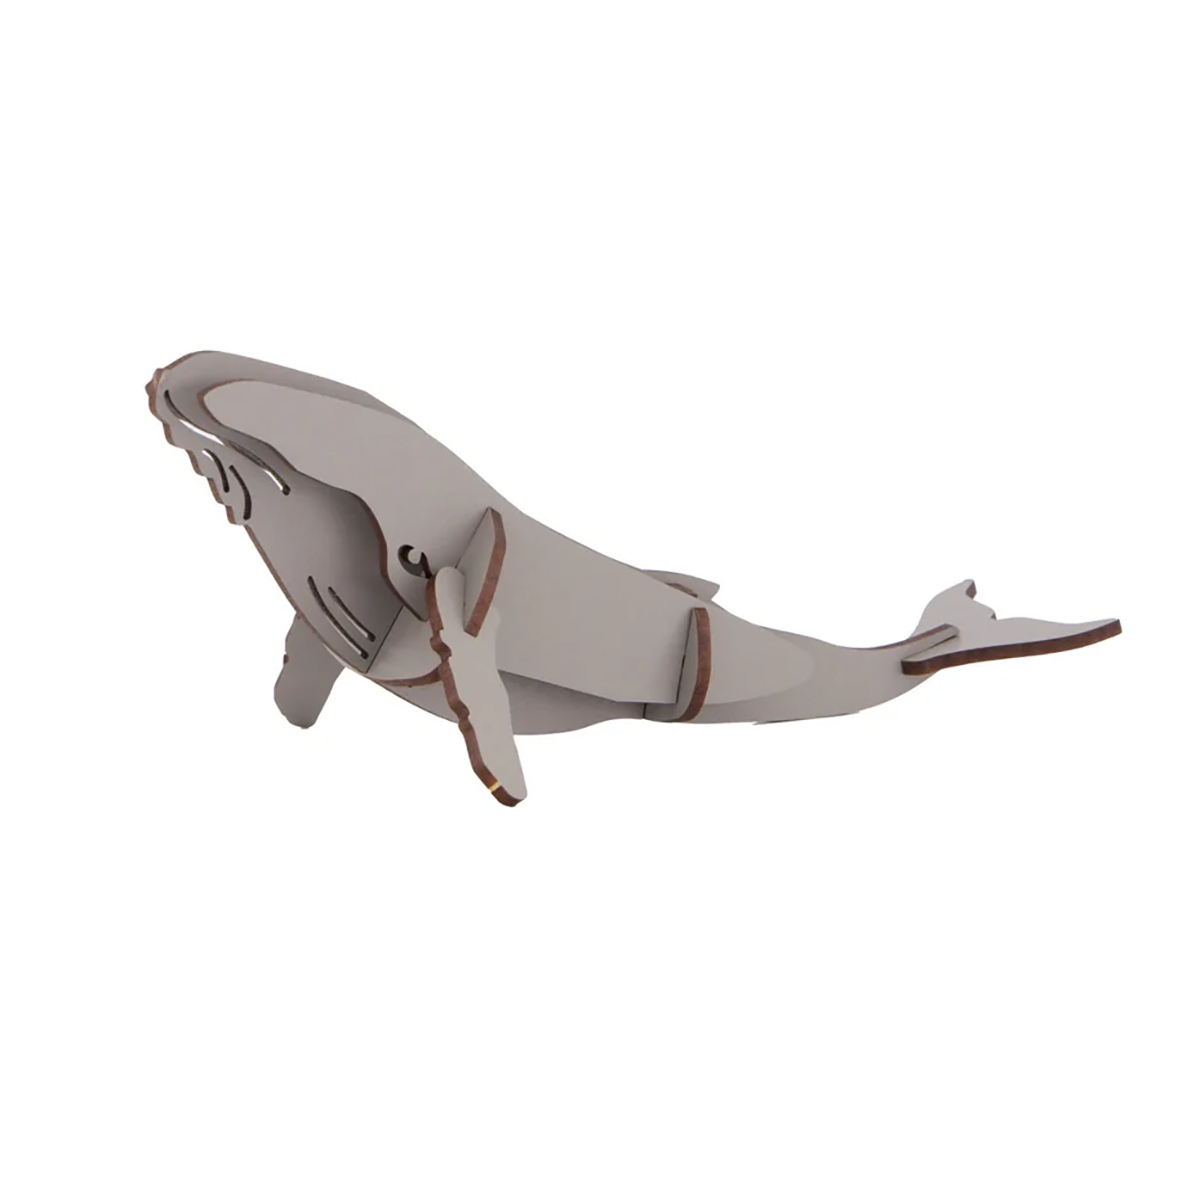 Humpback Whale Wooden Model Kit additional image